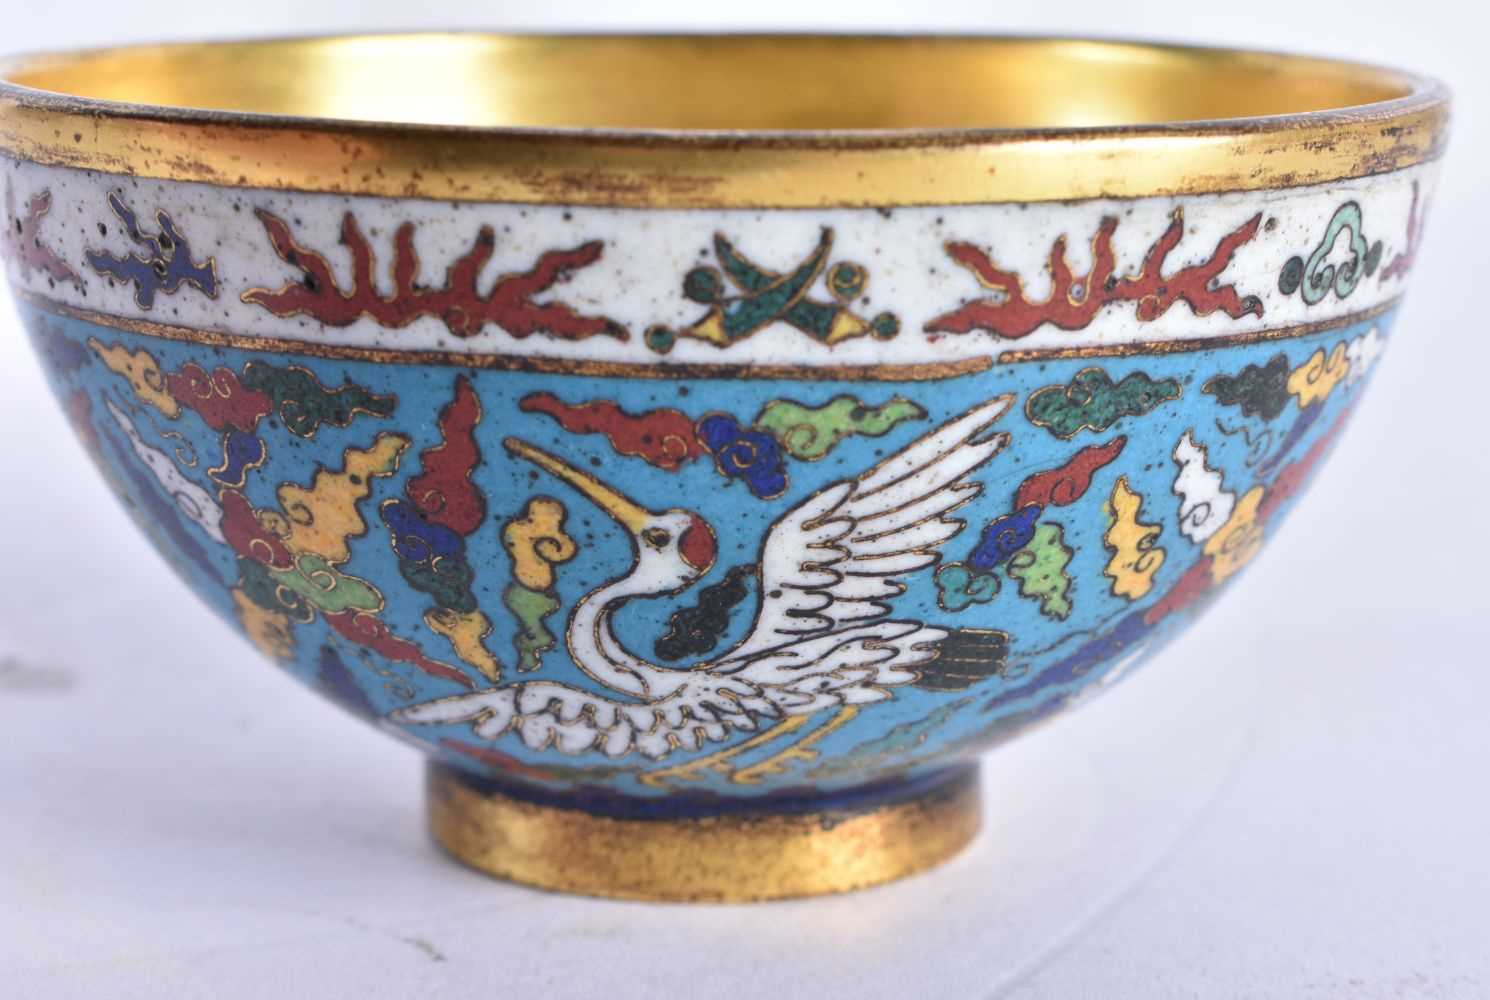 A FINE PAIR OF CLOISONNE ENAMEL BRONZE BOWLS Jiajing mark and probably of the period, decorated on a - Image 12 of 16